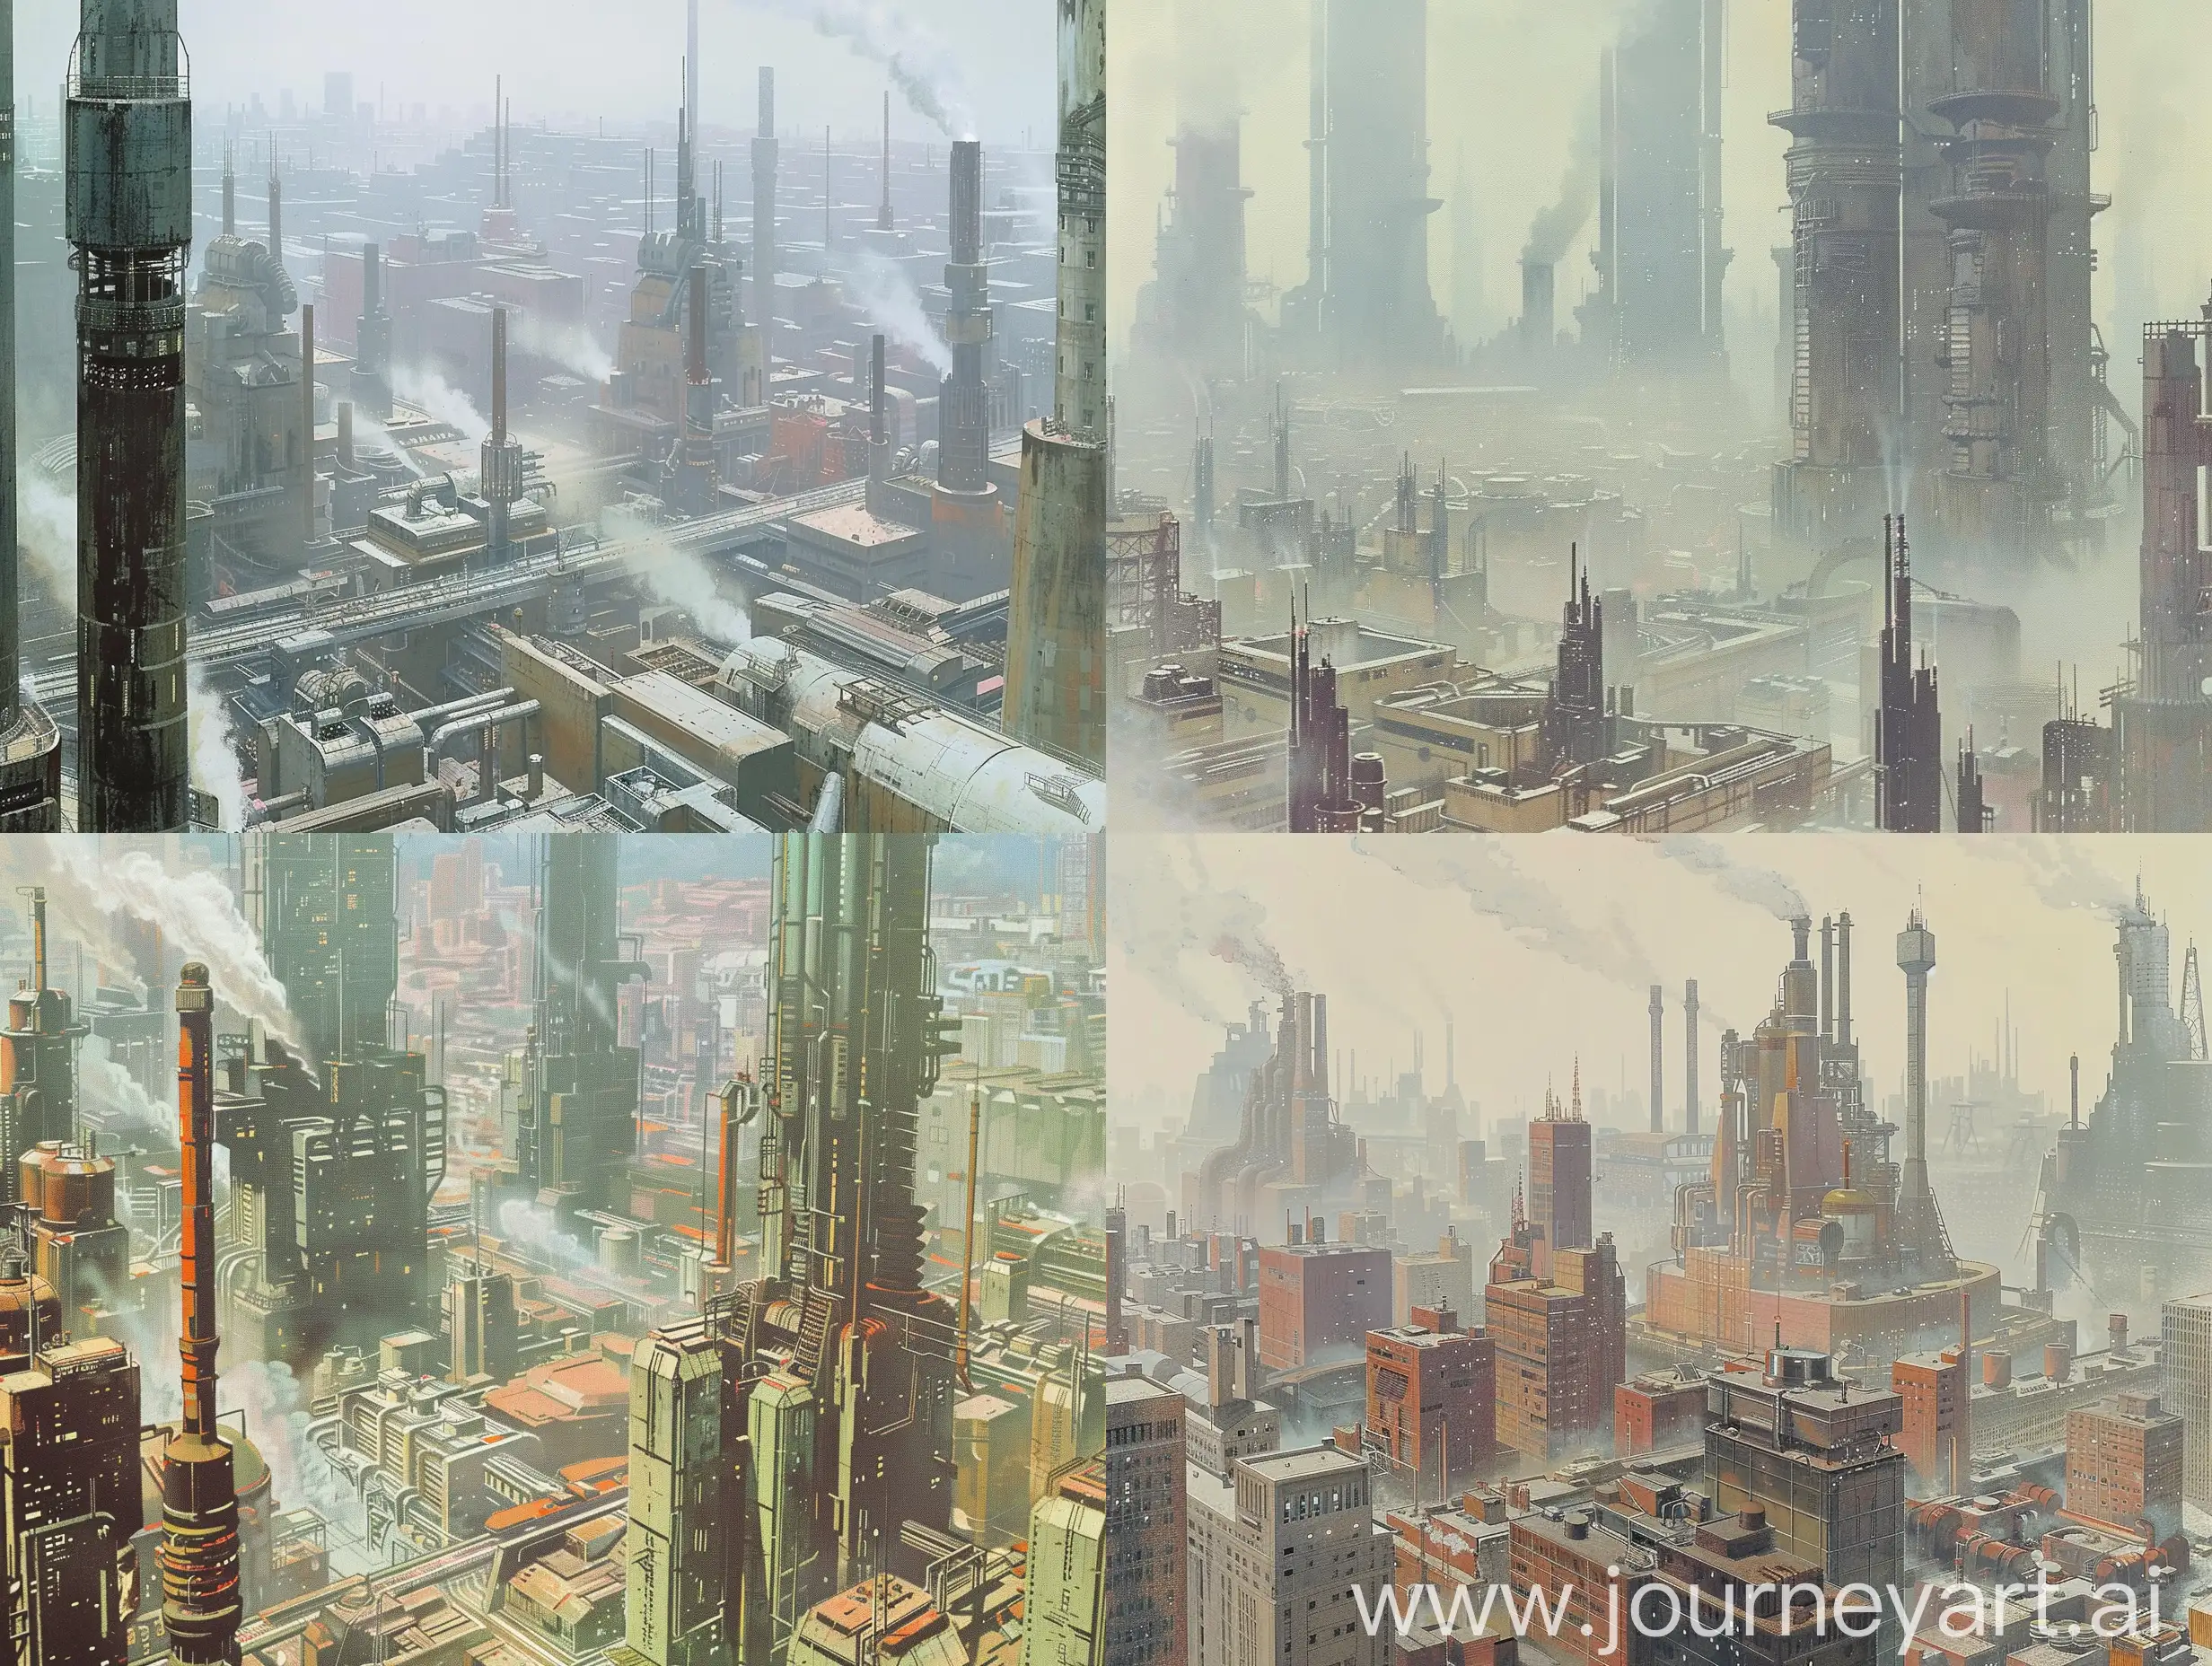 ralph mcquarrie concept art of a hazy futuristic industrial cityscape with tall buildings and factories. retro science fiction. in color.  